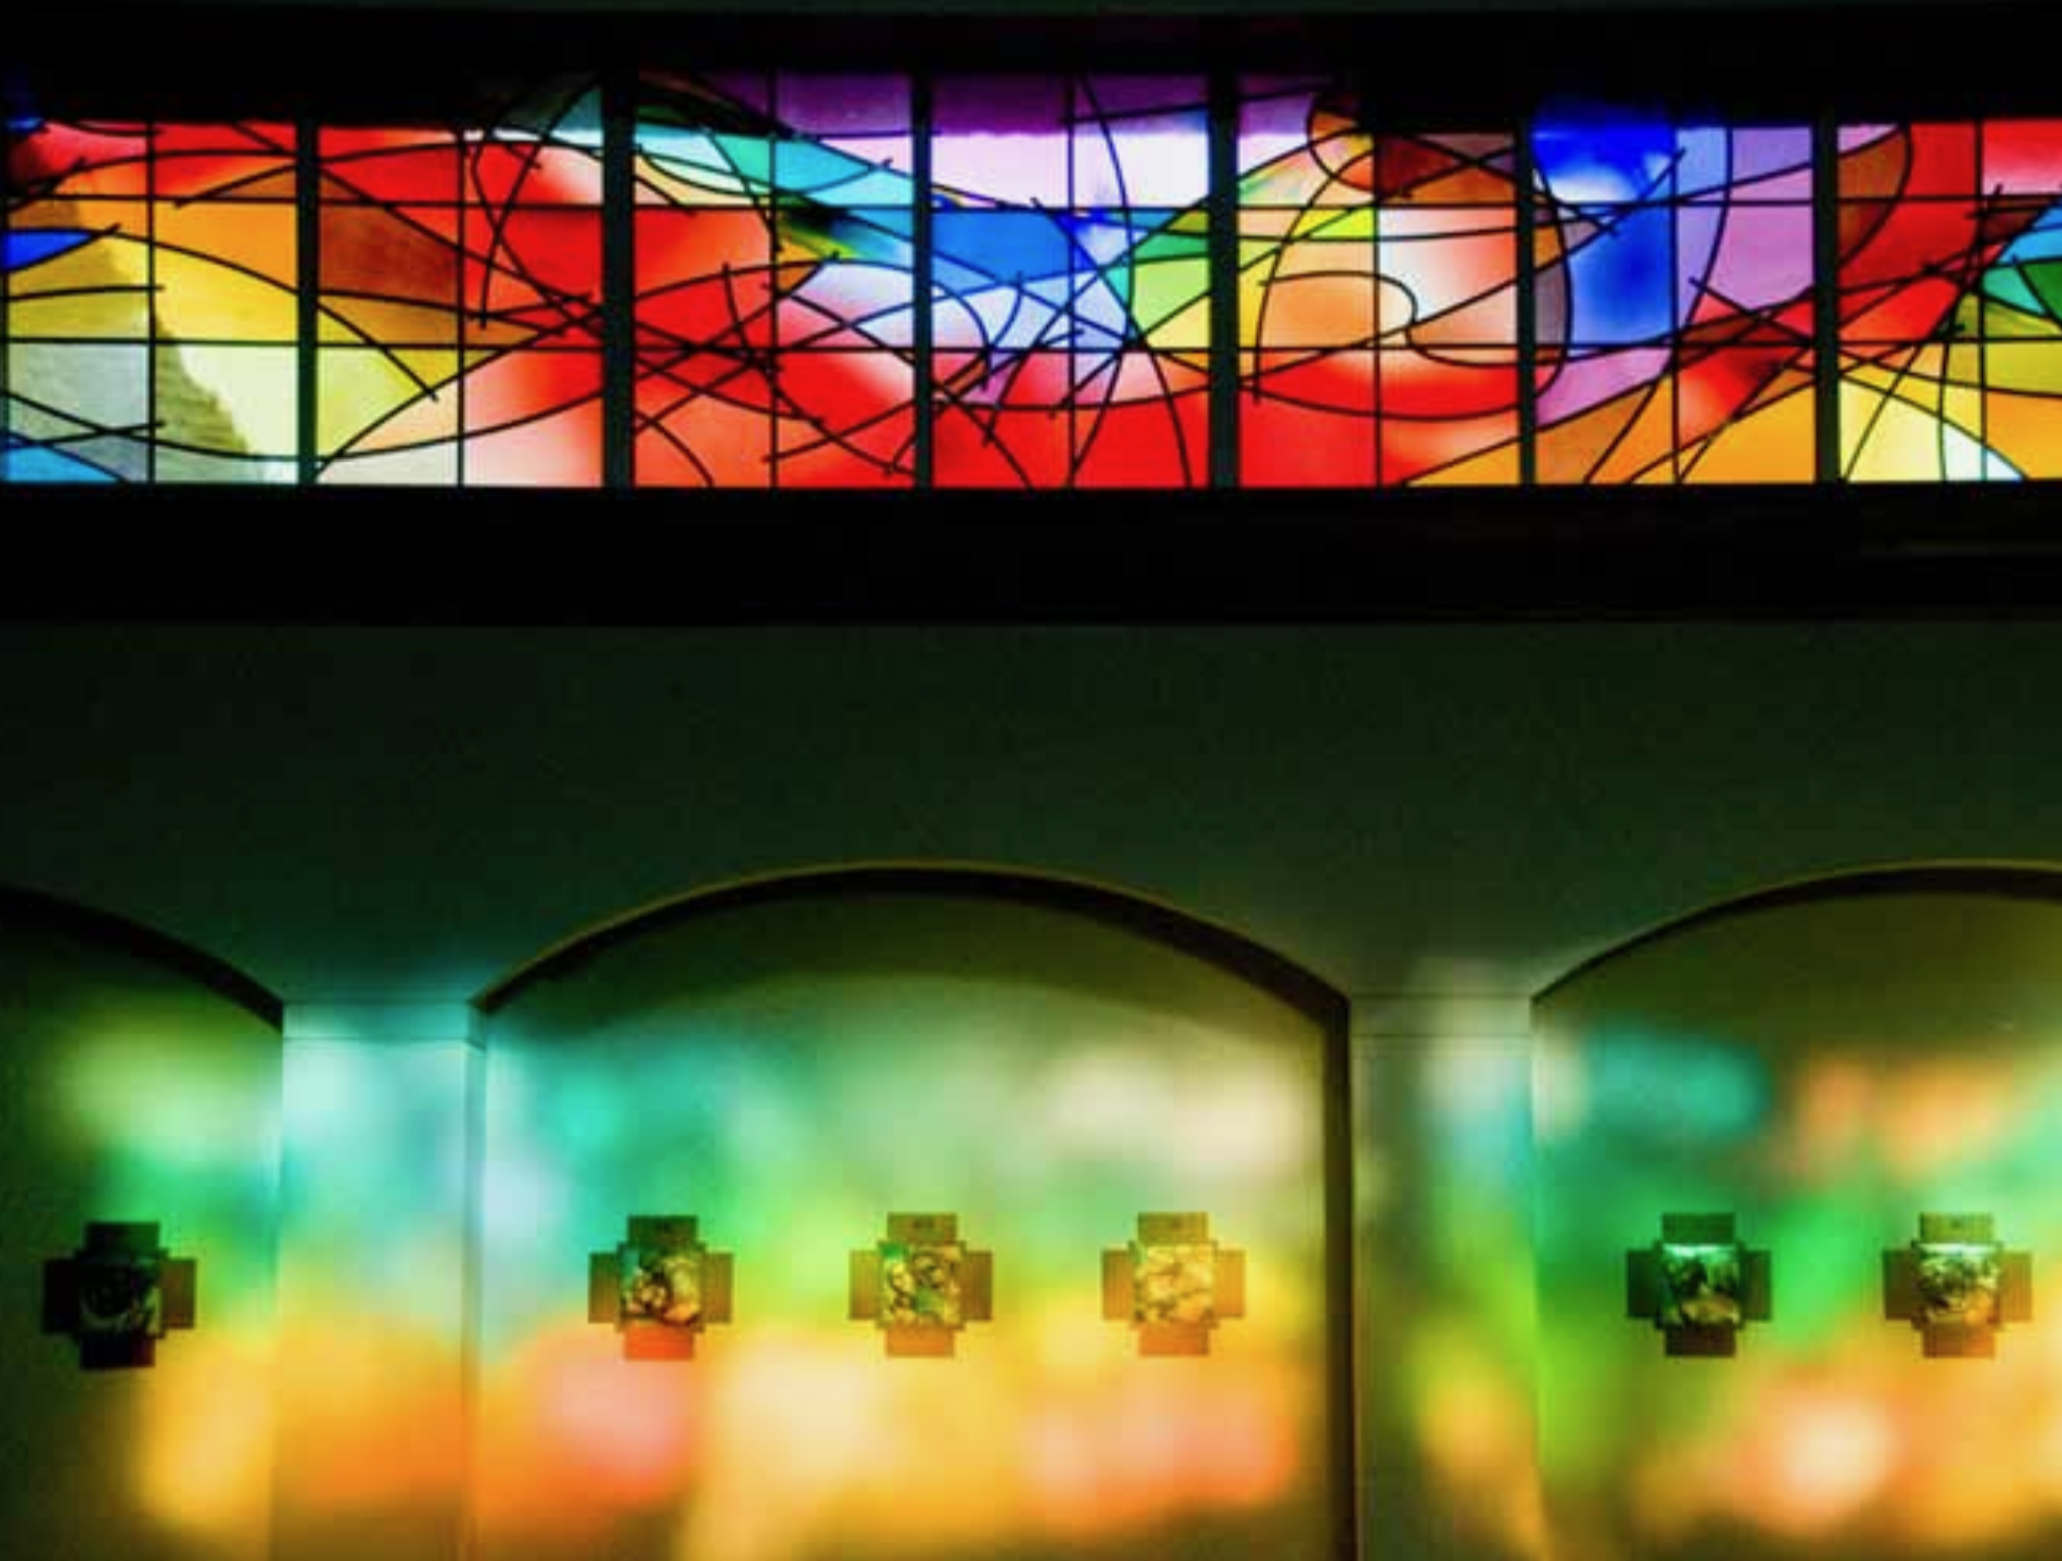 Create a simple stained-glass design that symbolizes the divine